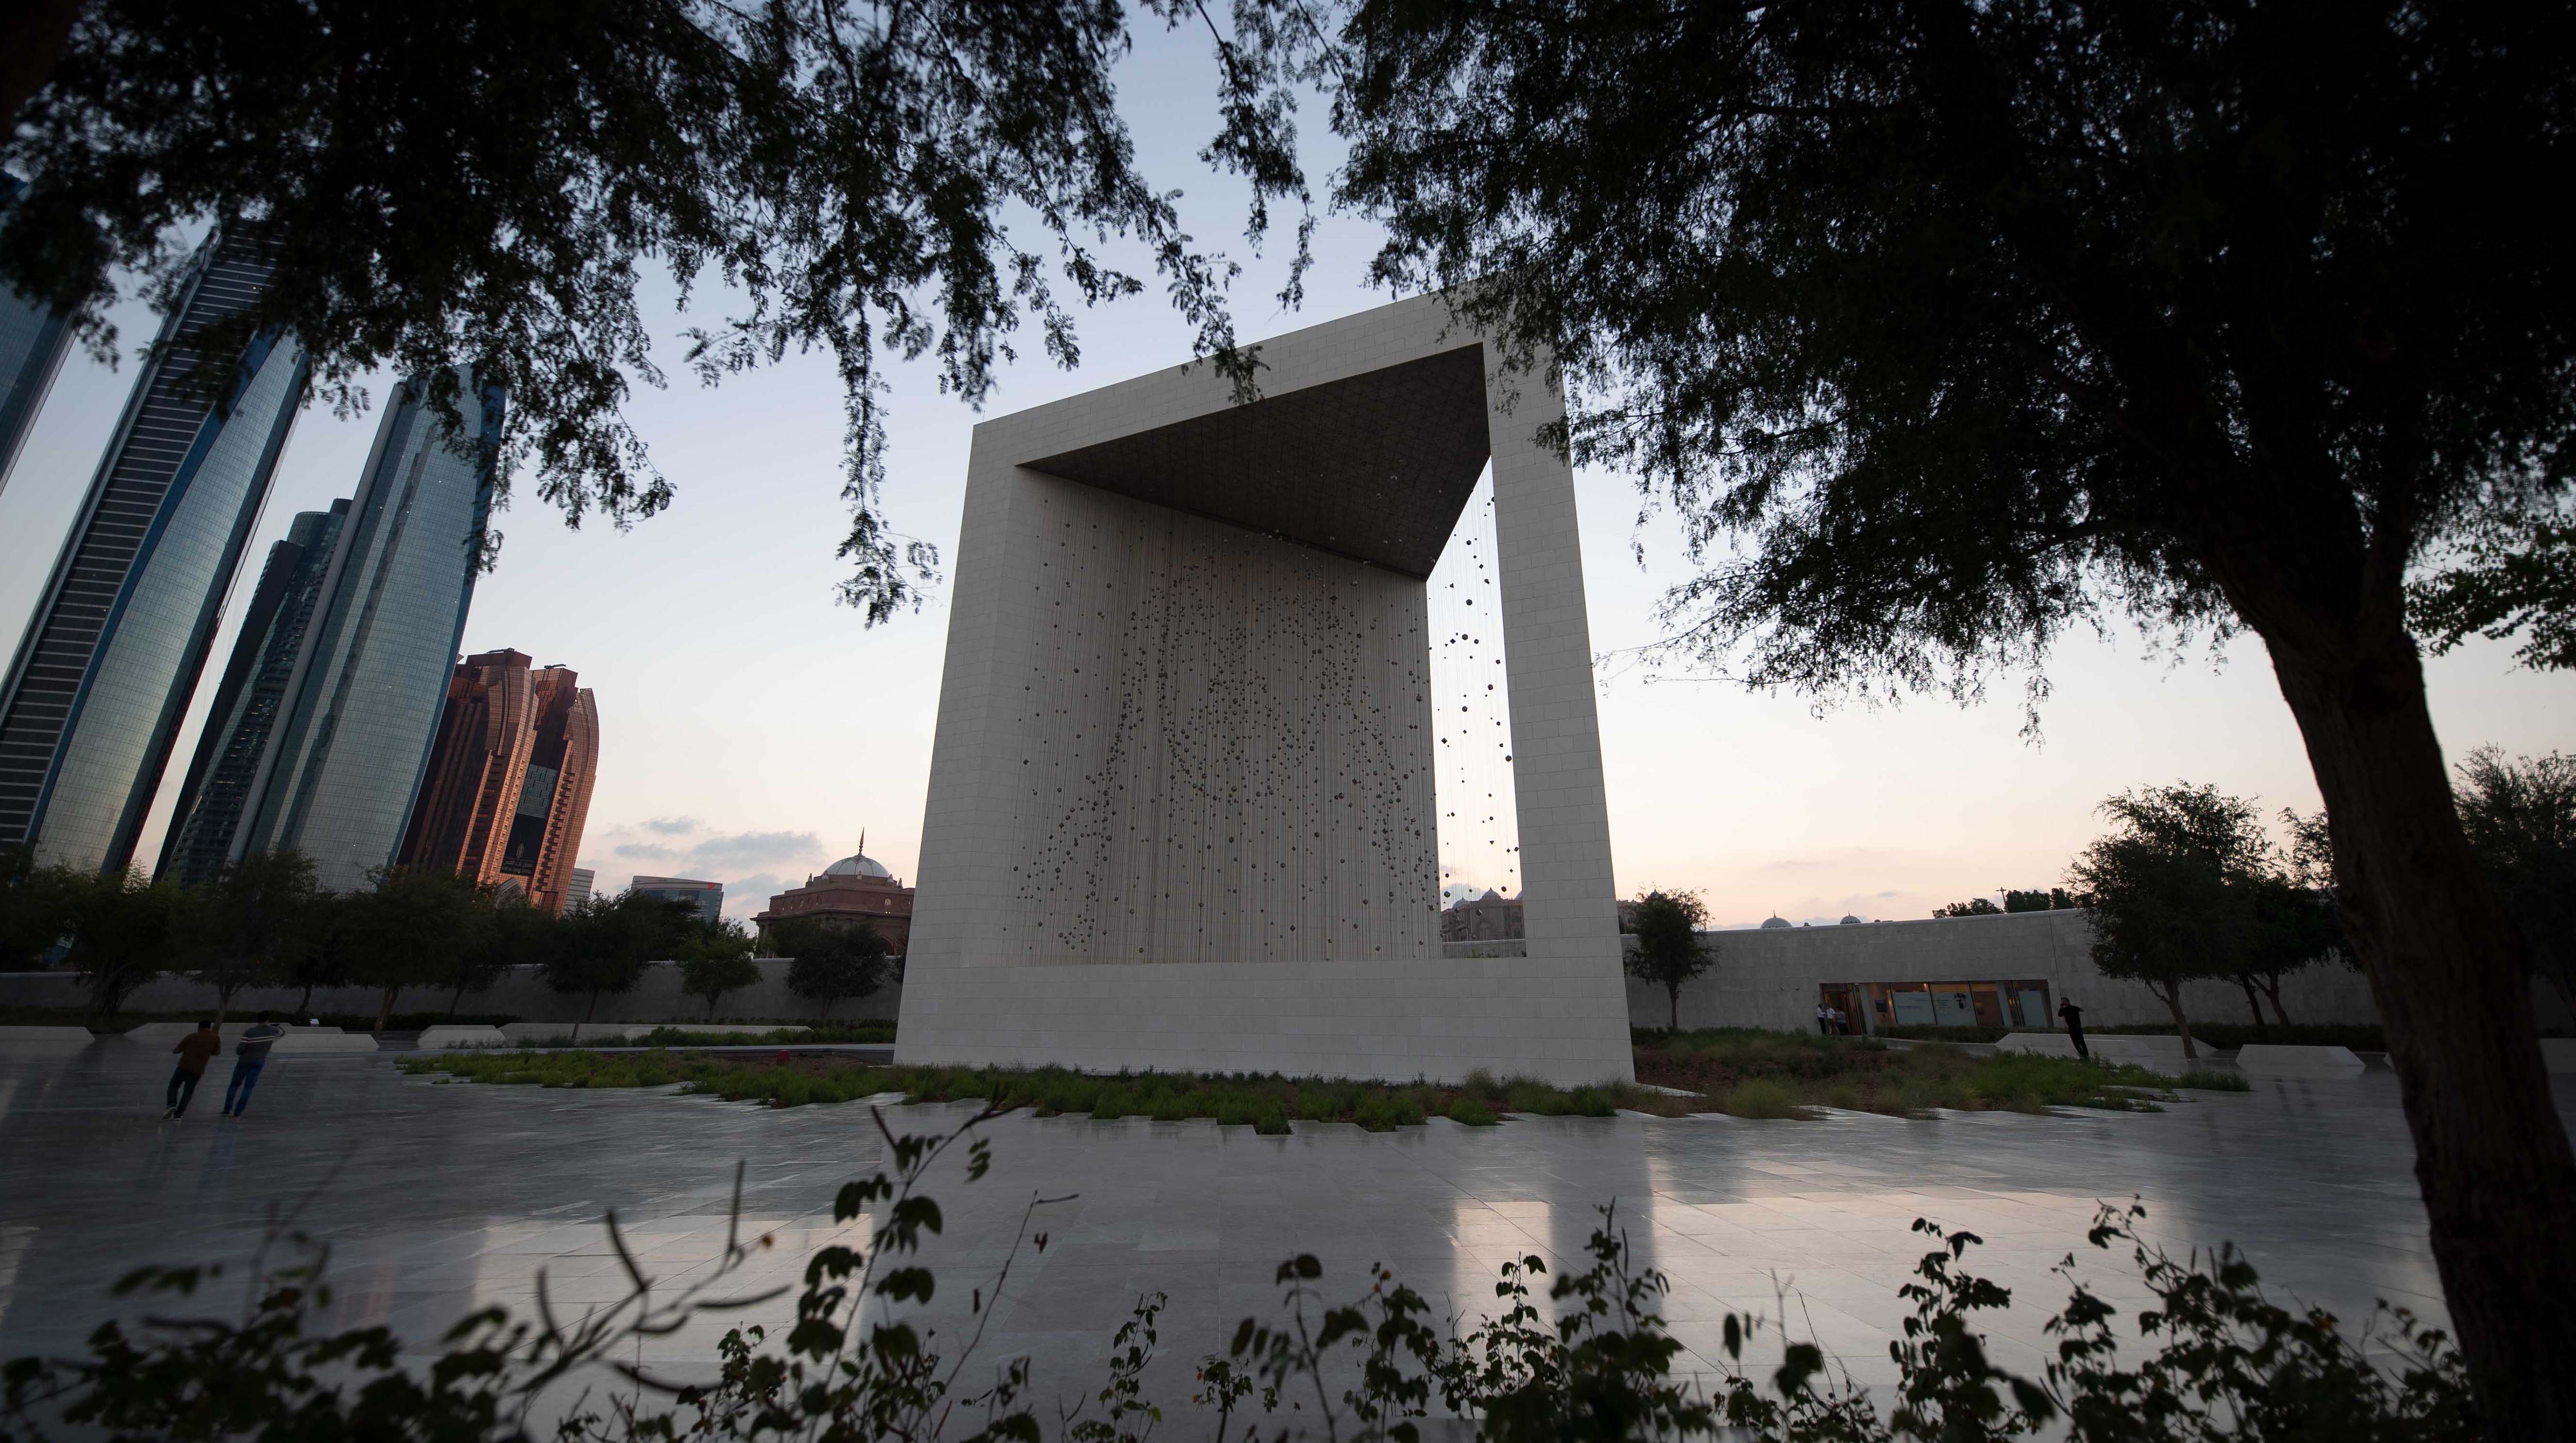 8. Learn about the UAE at the Founder’s Memorial